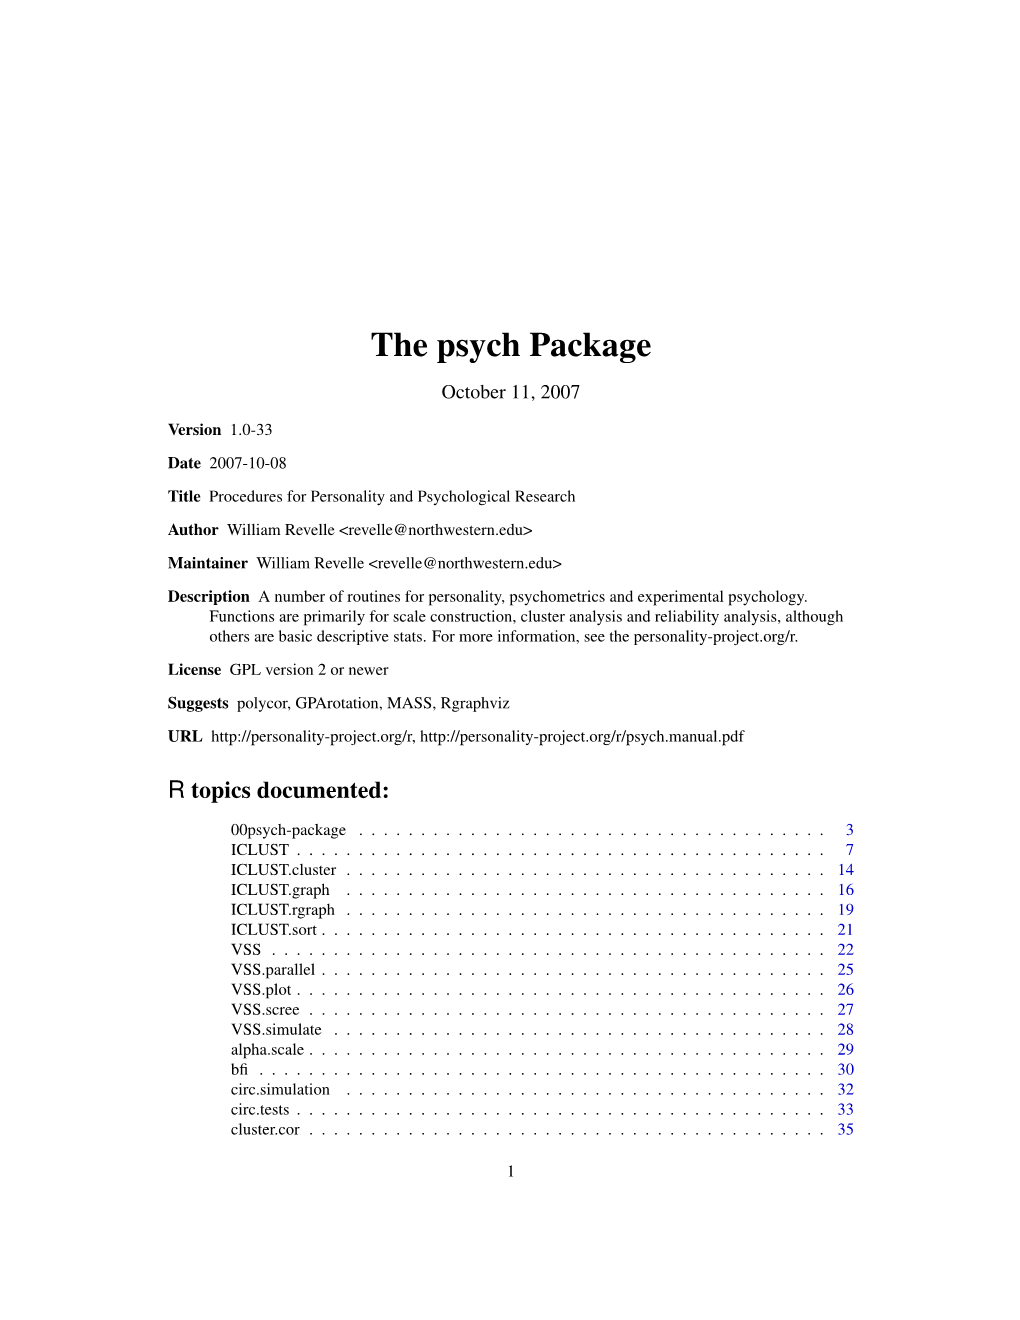 The Psych Package October 11, 2007